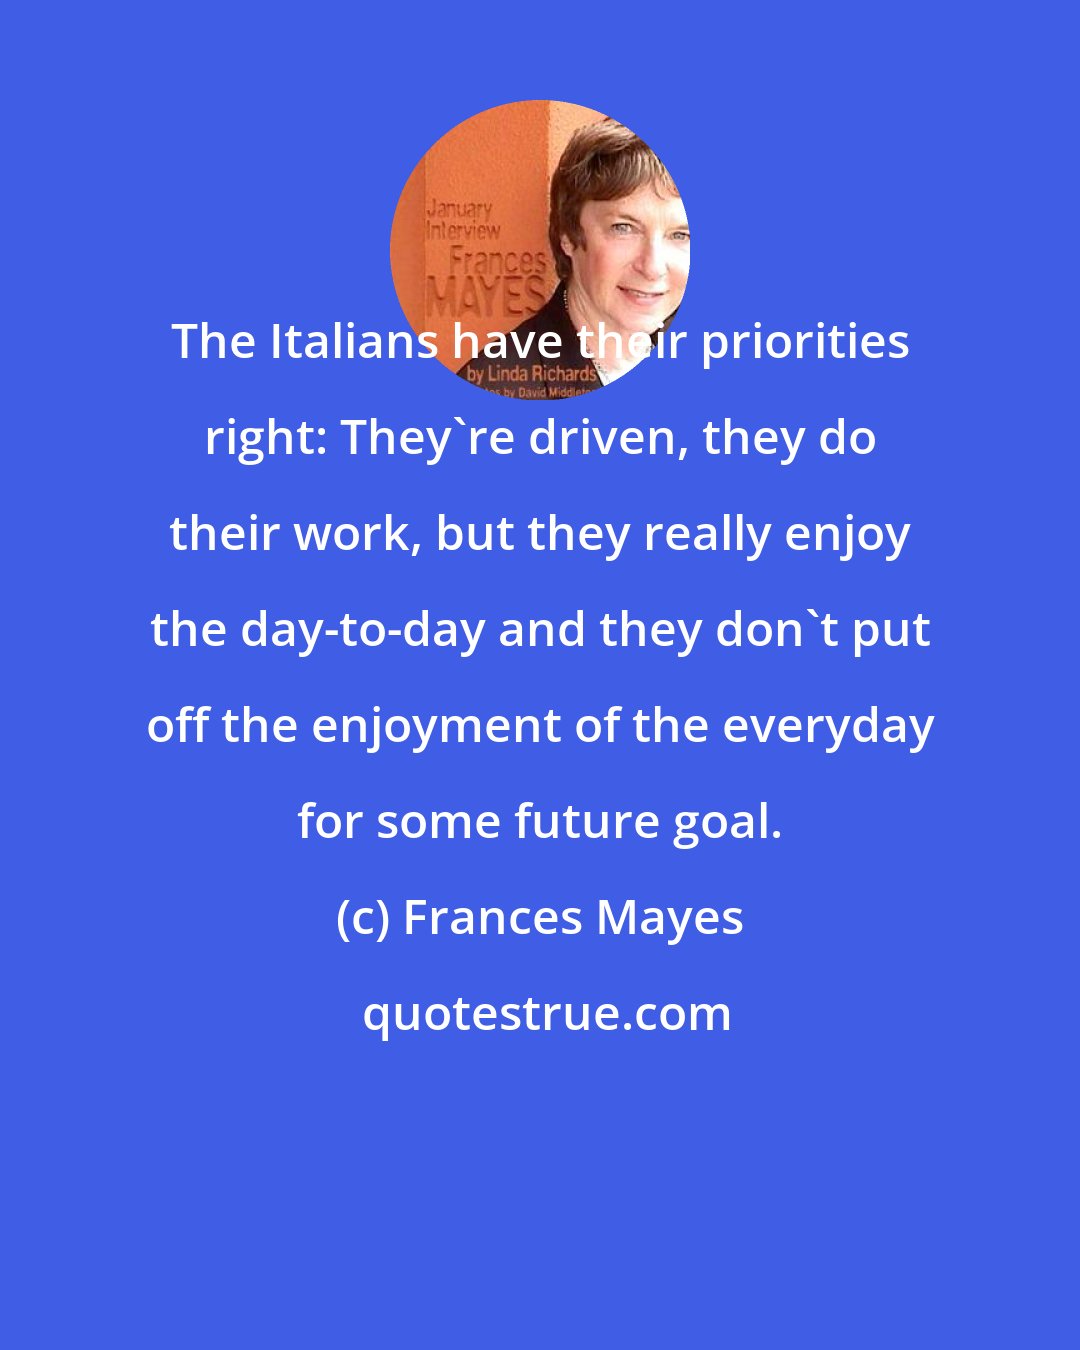 Frances Mayes: The Italians have their priorities right: They're driven, they do their work, but they really enjoy the day-to-day and they don't put off the enjoyment of the everyday for some future goal.